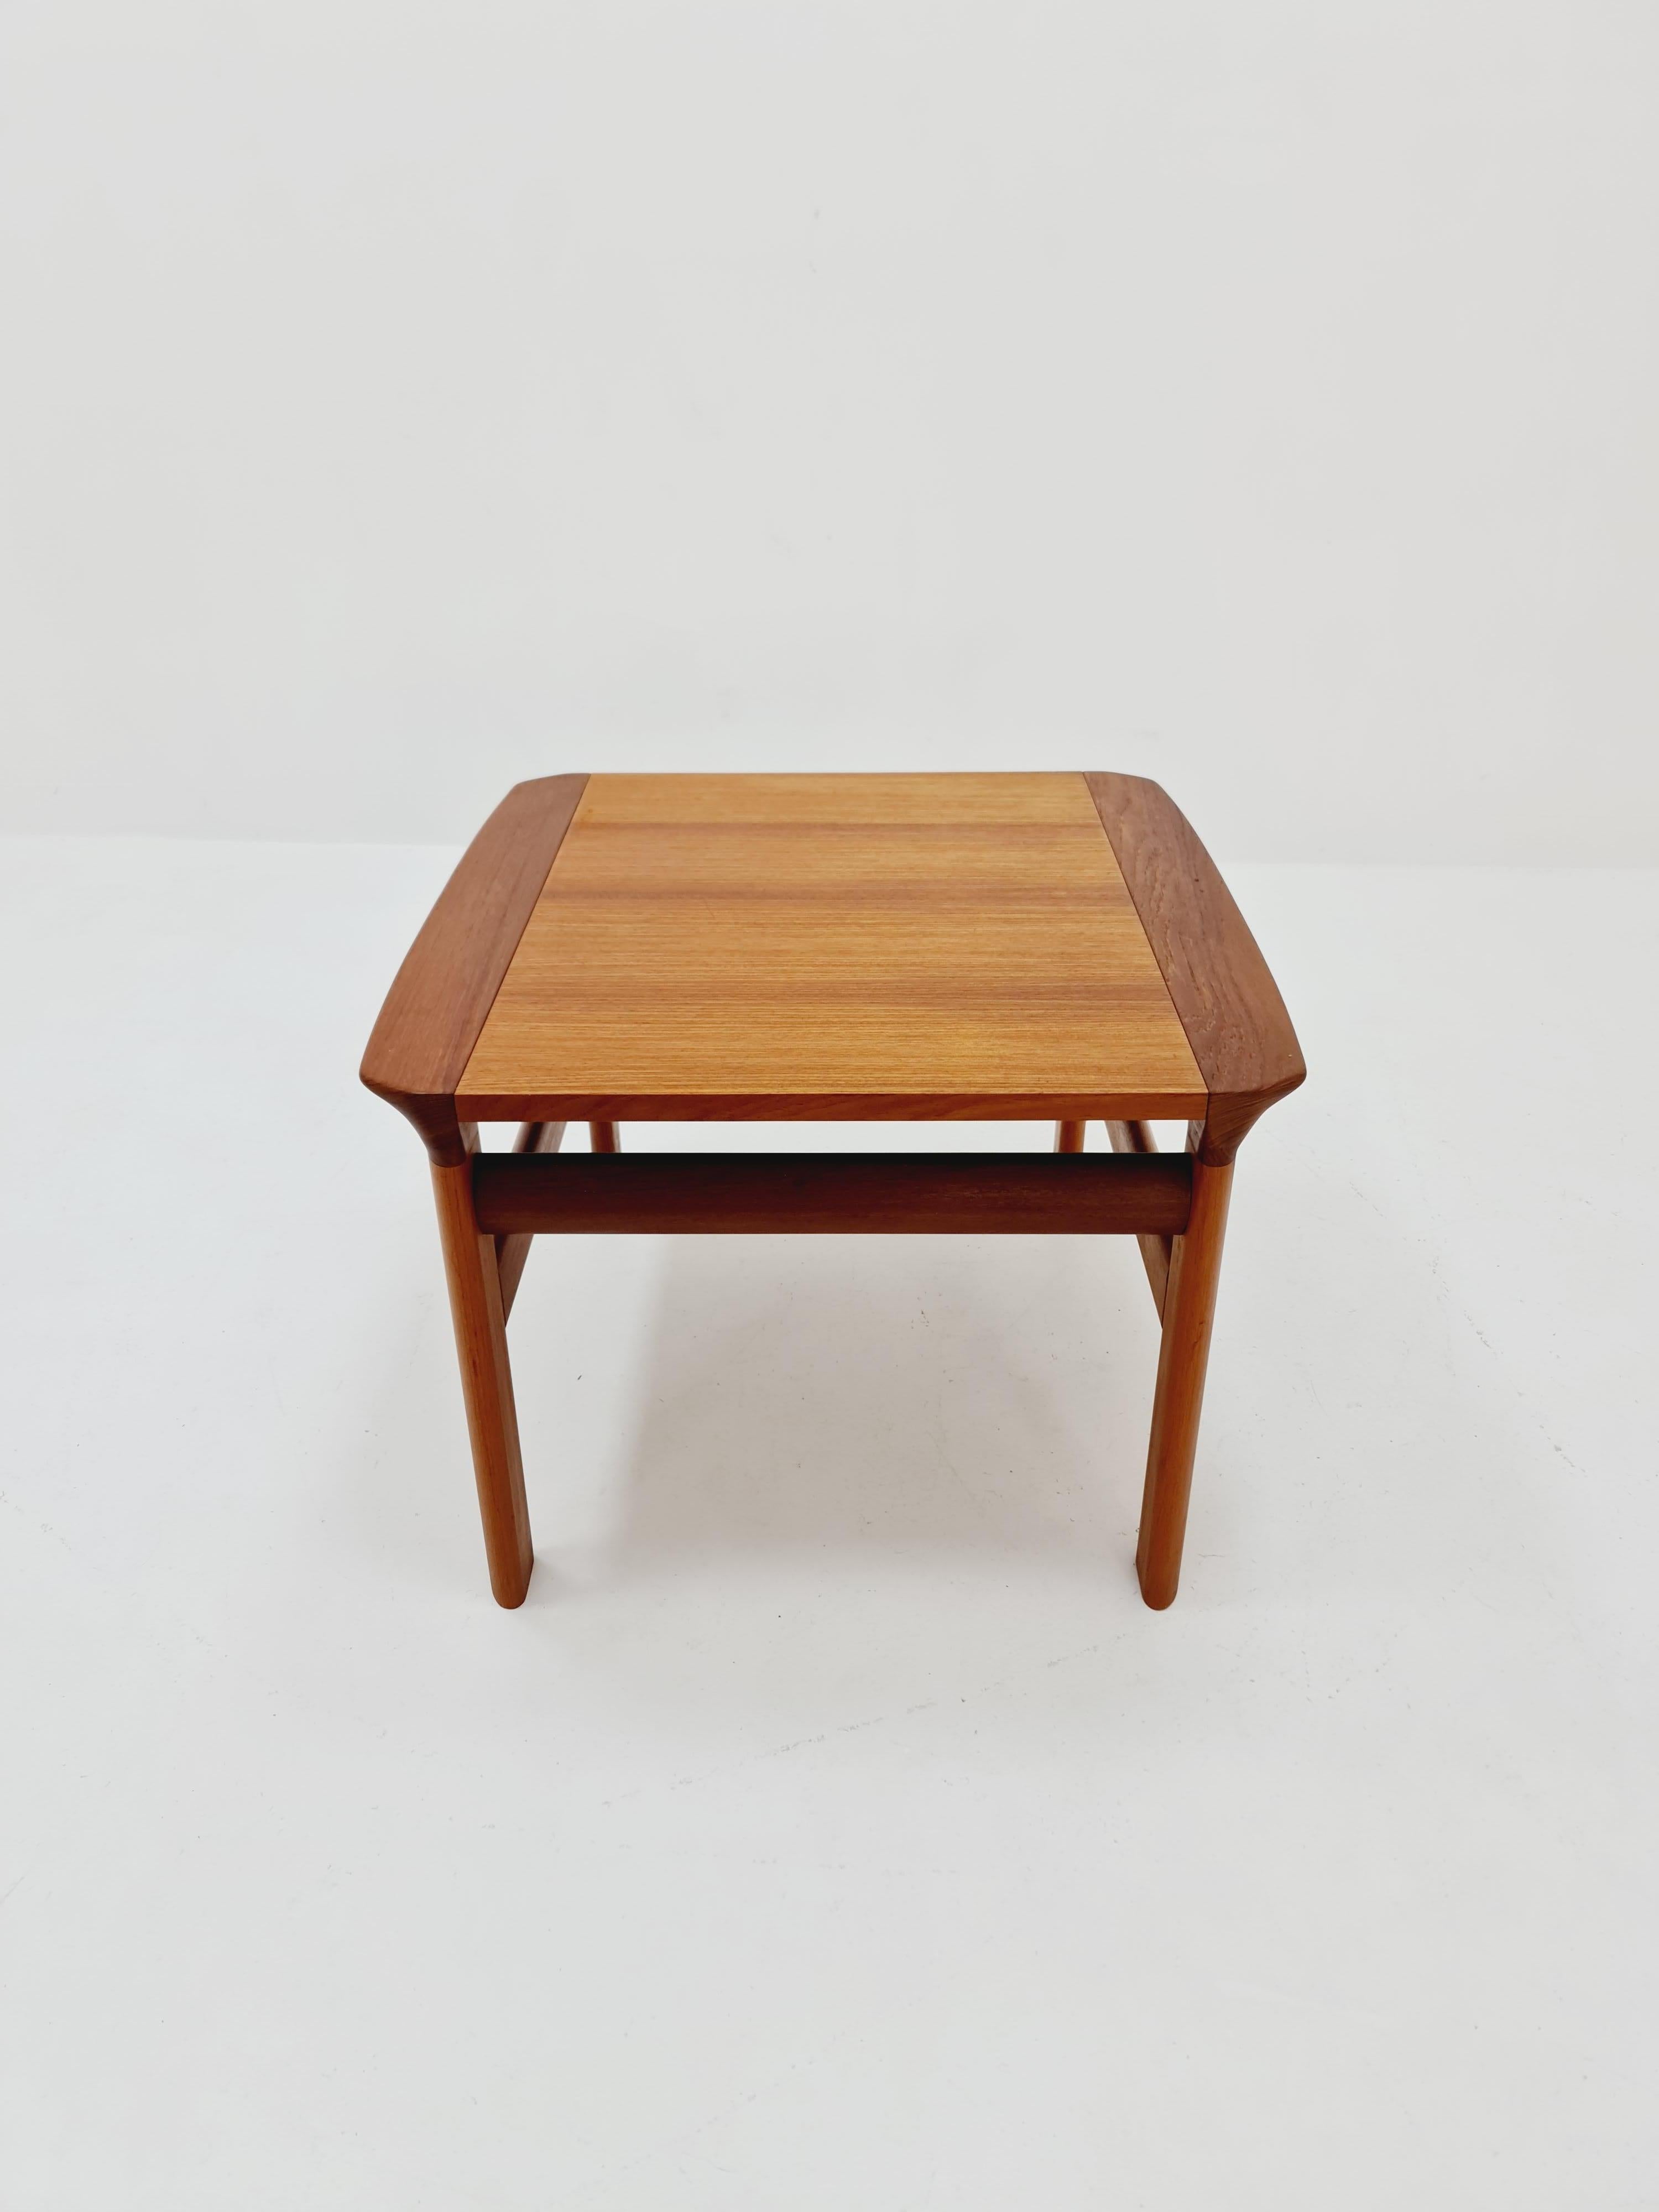 Danish Teak Coffee table by Sven Ellekaer for Komfort Møbelfabrik, 1960s

Design year: 1960s 

Made in Denmark by Sven ellekaer for Komfort Møbelfabrik

Dimensions: : 71 D x 71 B x 51 H cm

It is in great vintage condtion, however, as with all